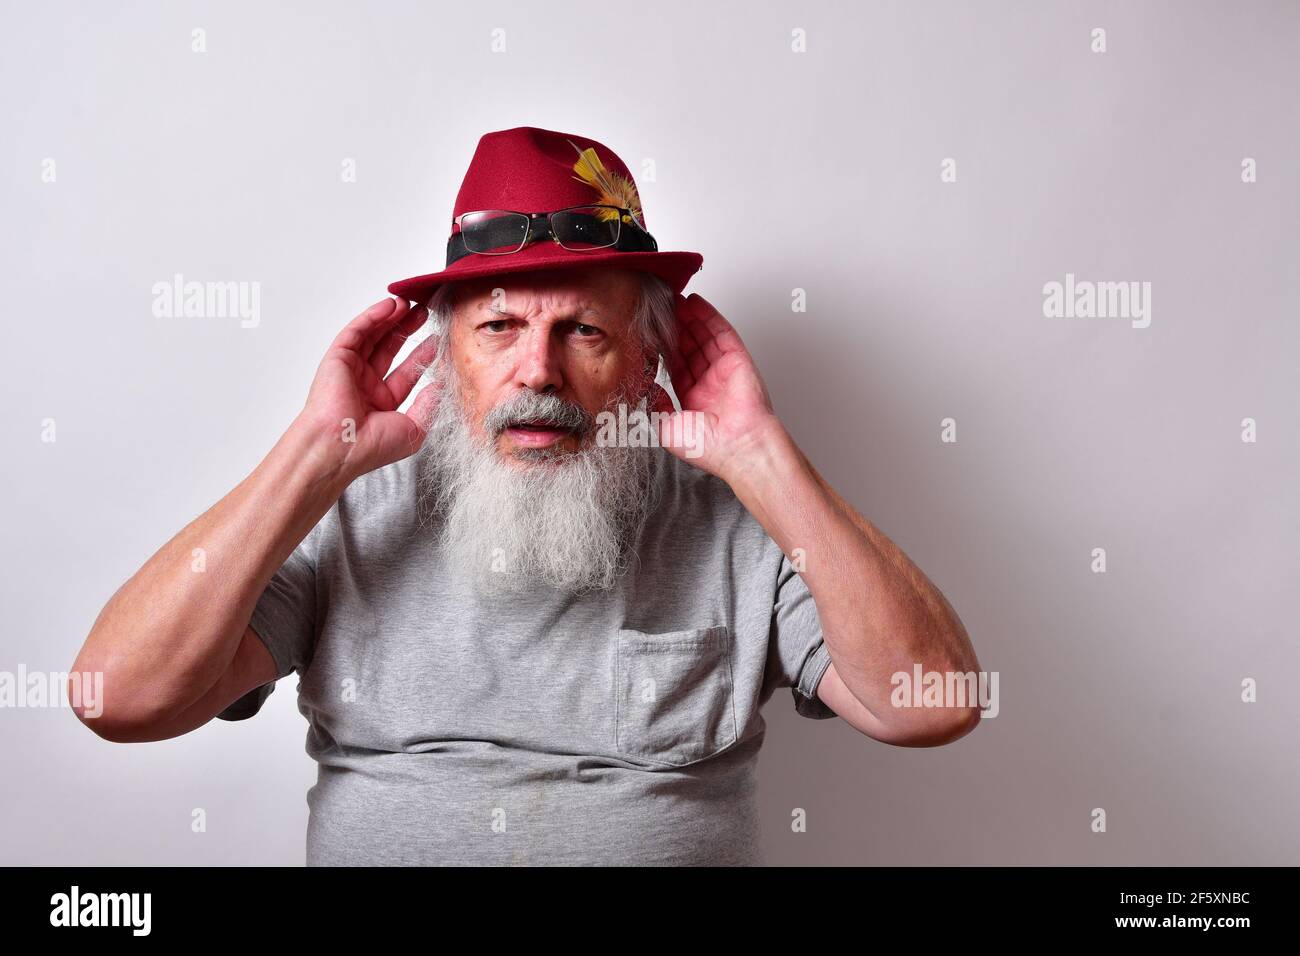 Older Man with Beard and Hat Stock Image - Image of white, shirt: 106234387